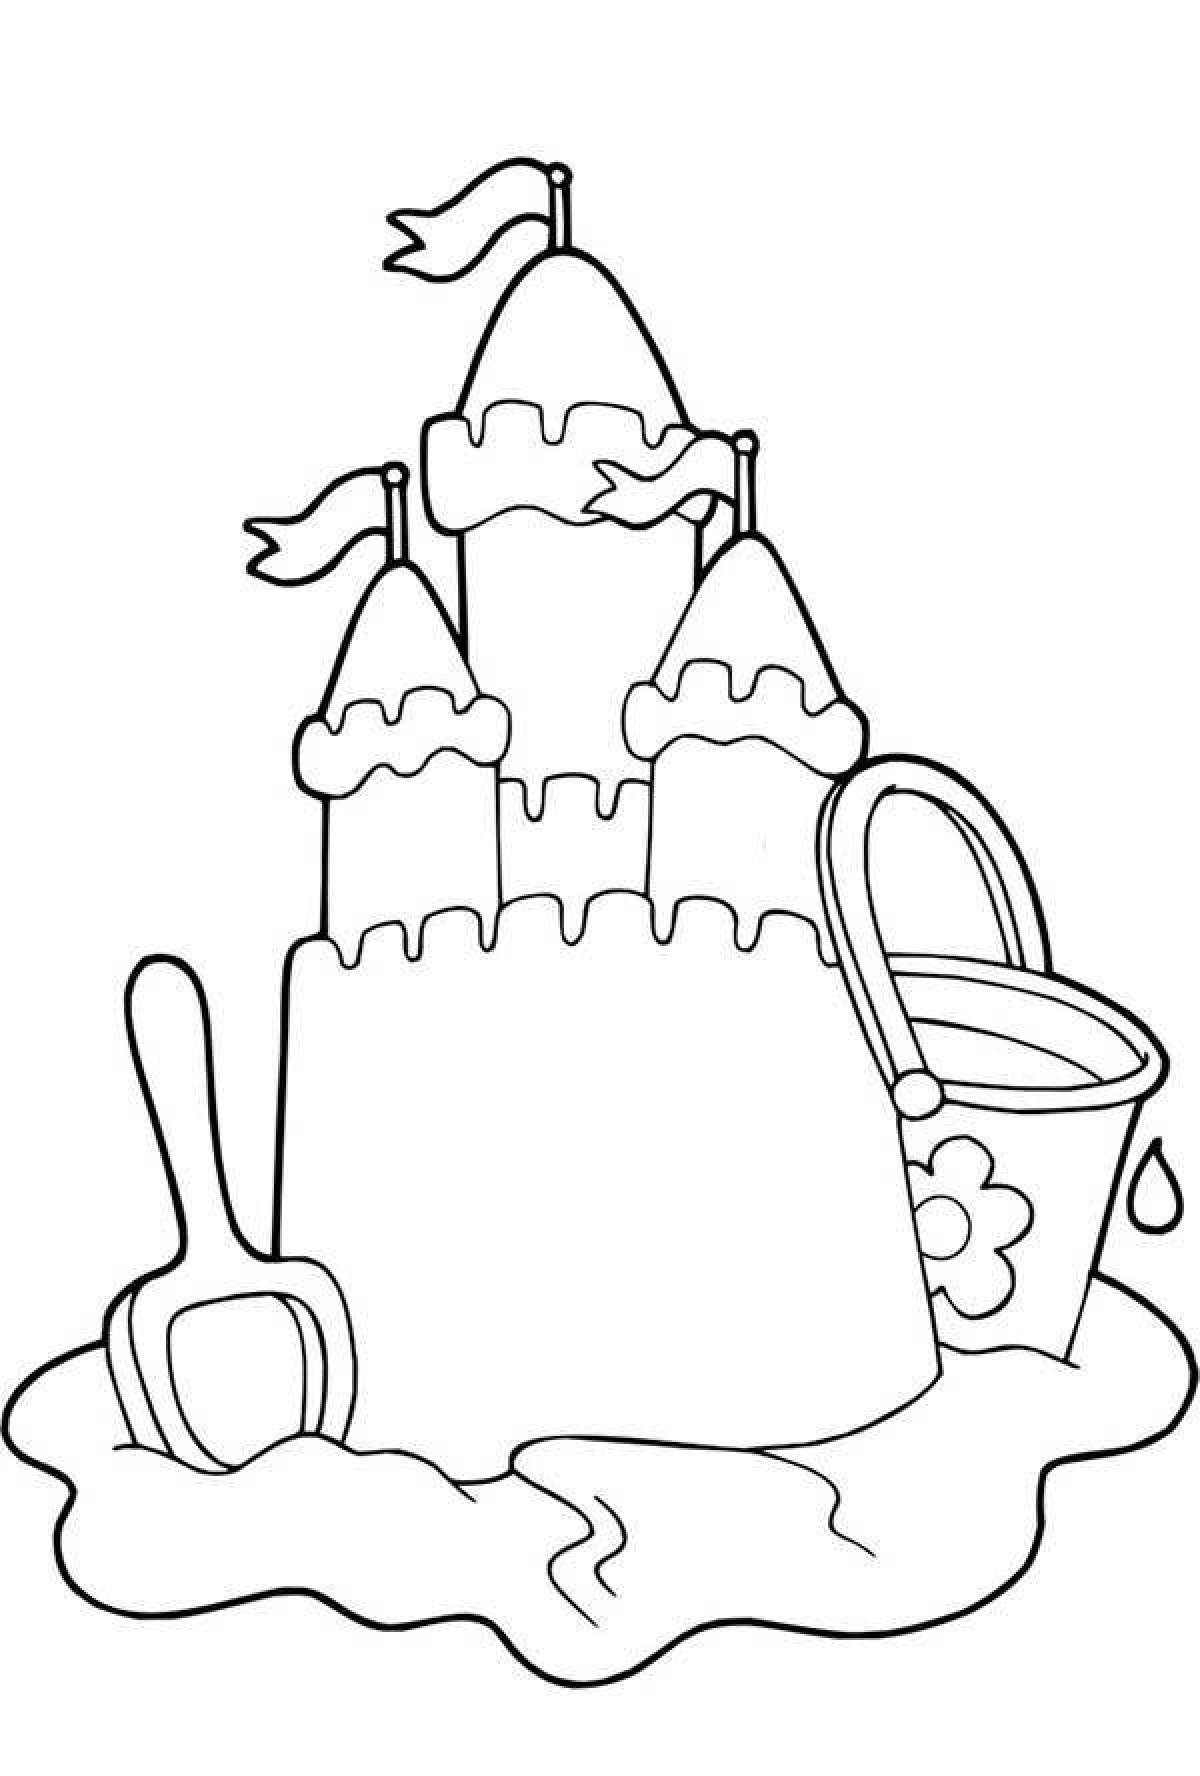 Peaceful sand coloring page